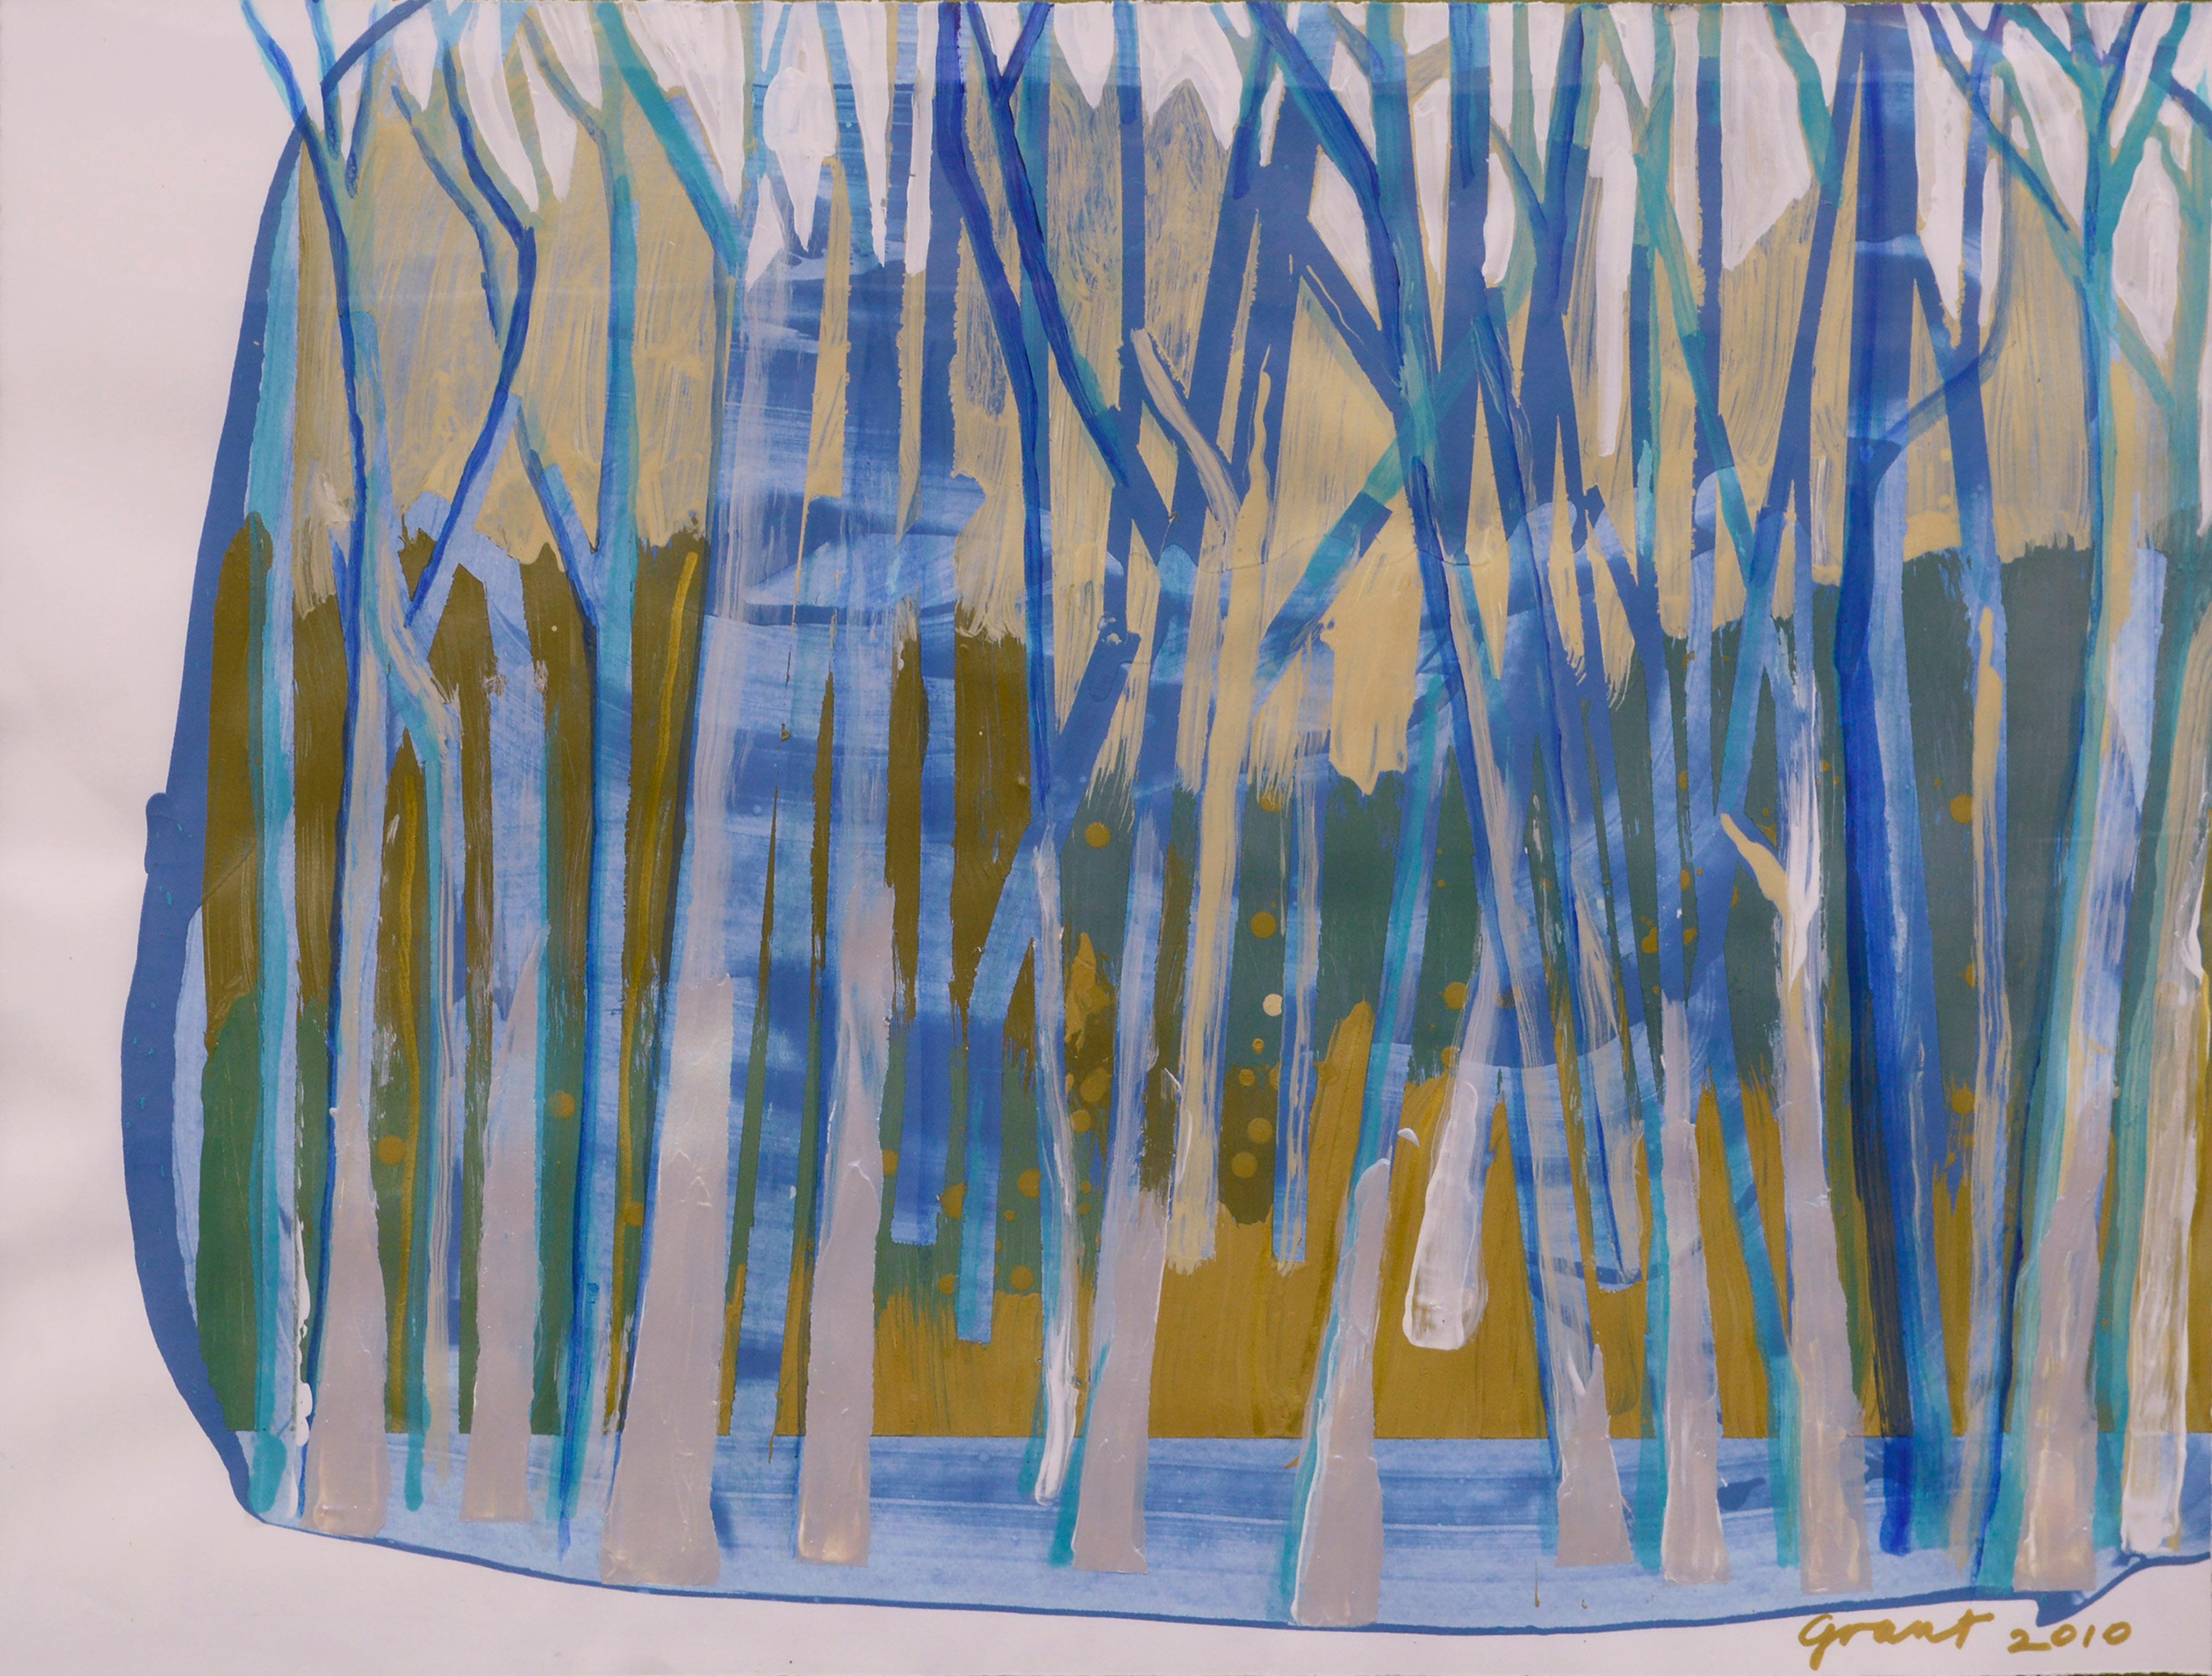 Contemporary abstracted landscape, a large-scale acrylic painting on paper, depicting a blue forest composed of linear trees in cool tones with earthy yellow accents by Marc Foster Grant (American, b. 1947). Signed and dated 